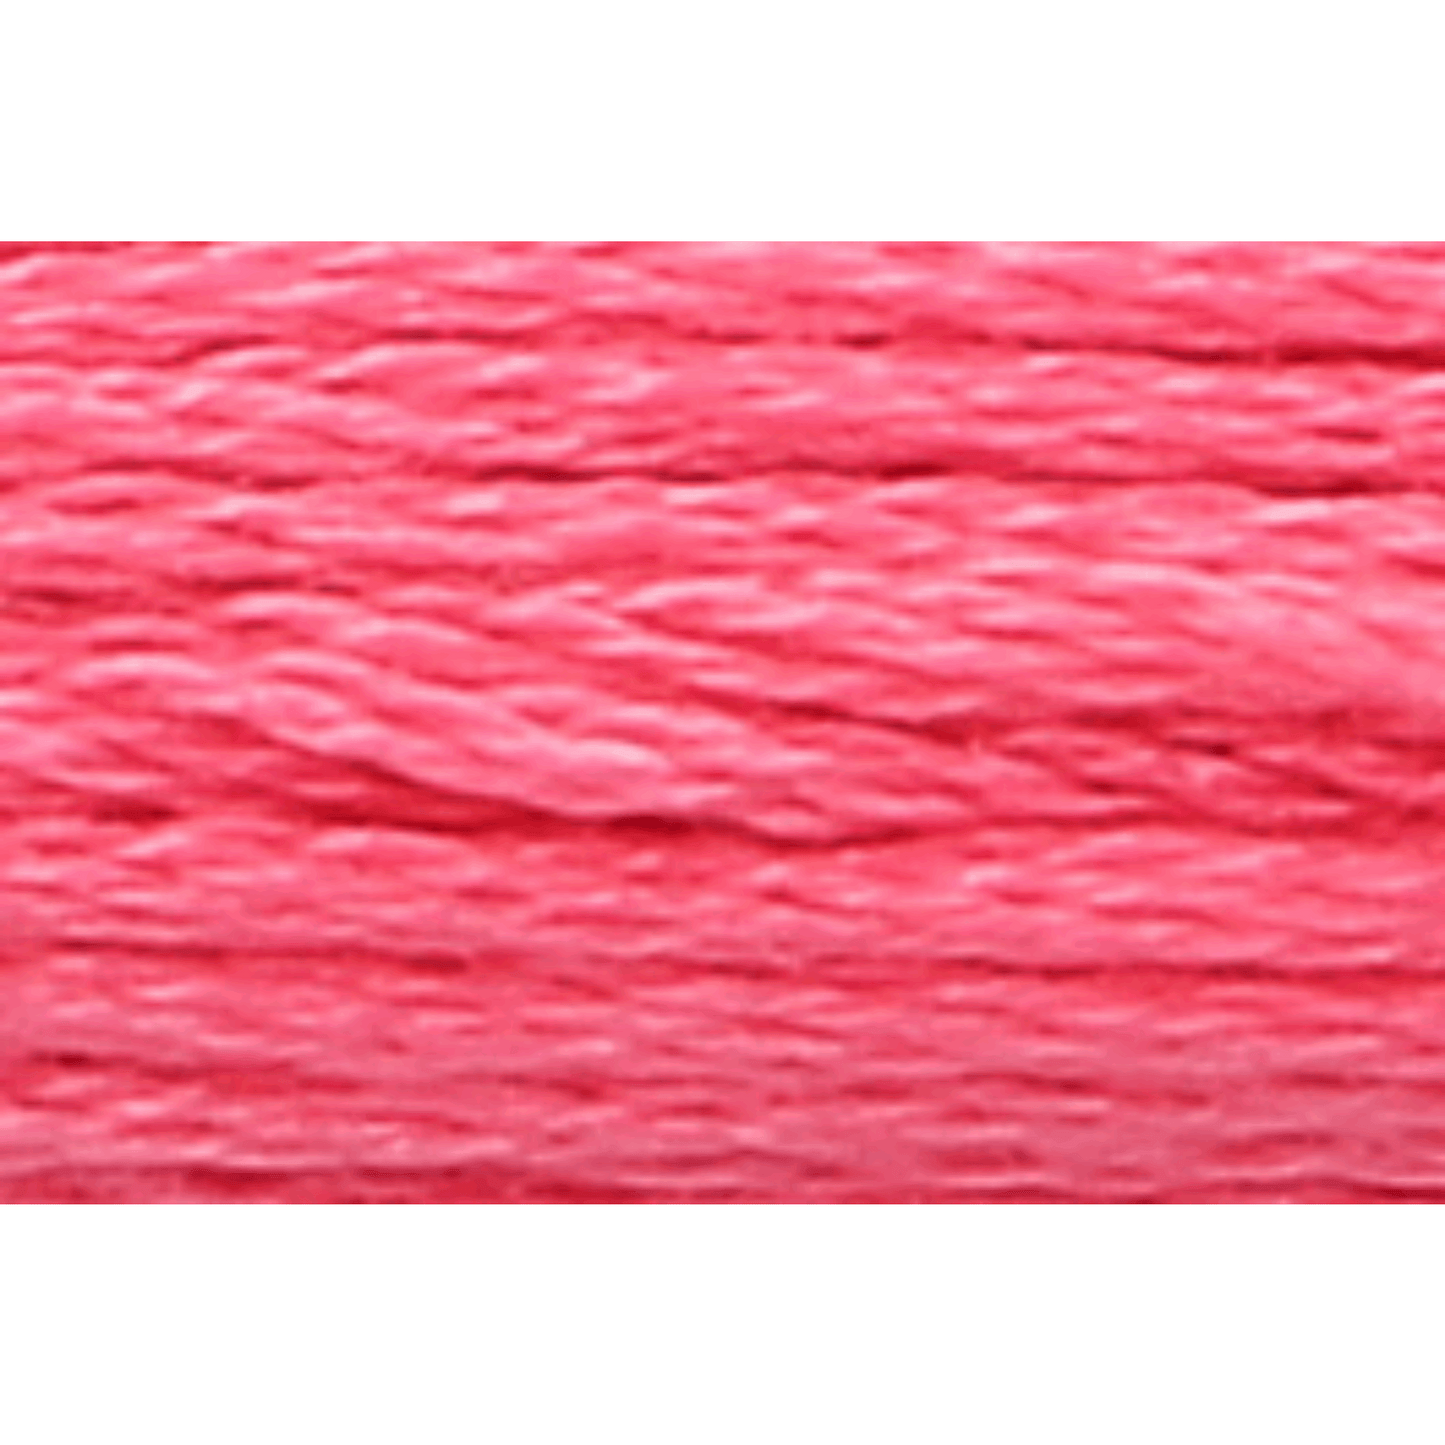 Anchor embroidery thread, 2g, colour 40 light pink